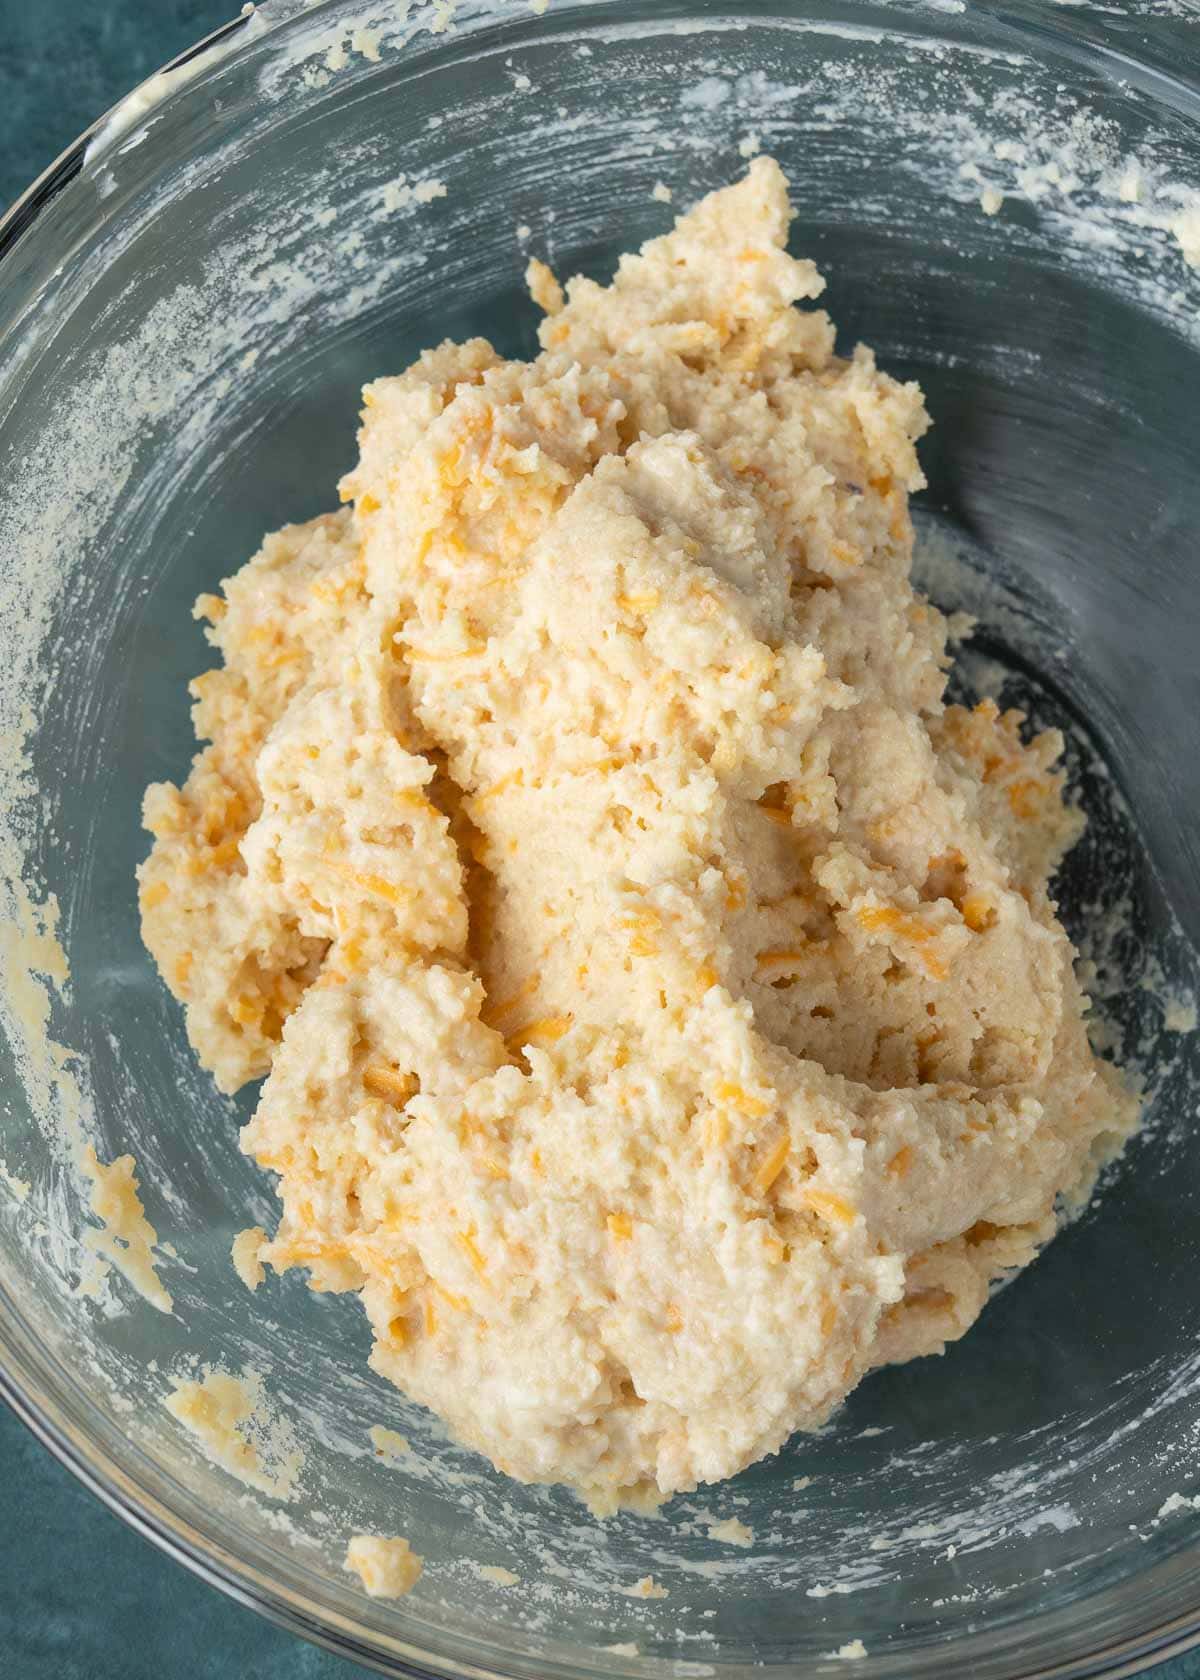 biscuit dough in a clear mixing bowl